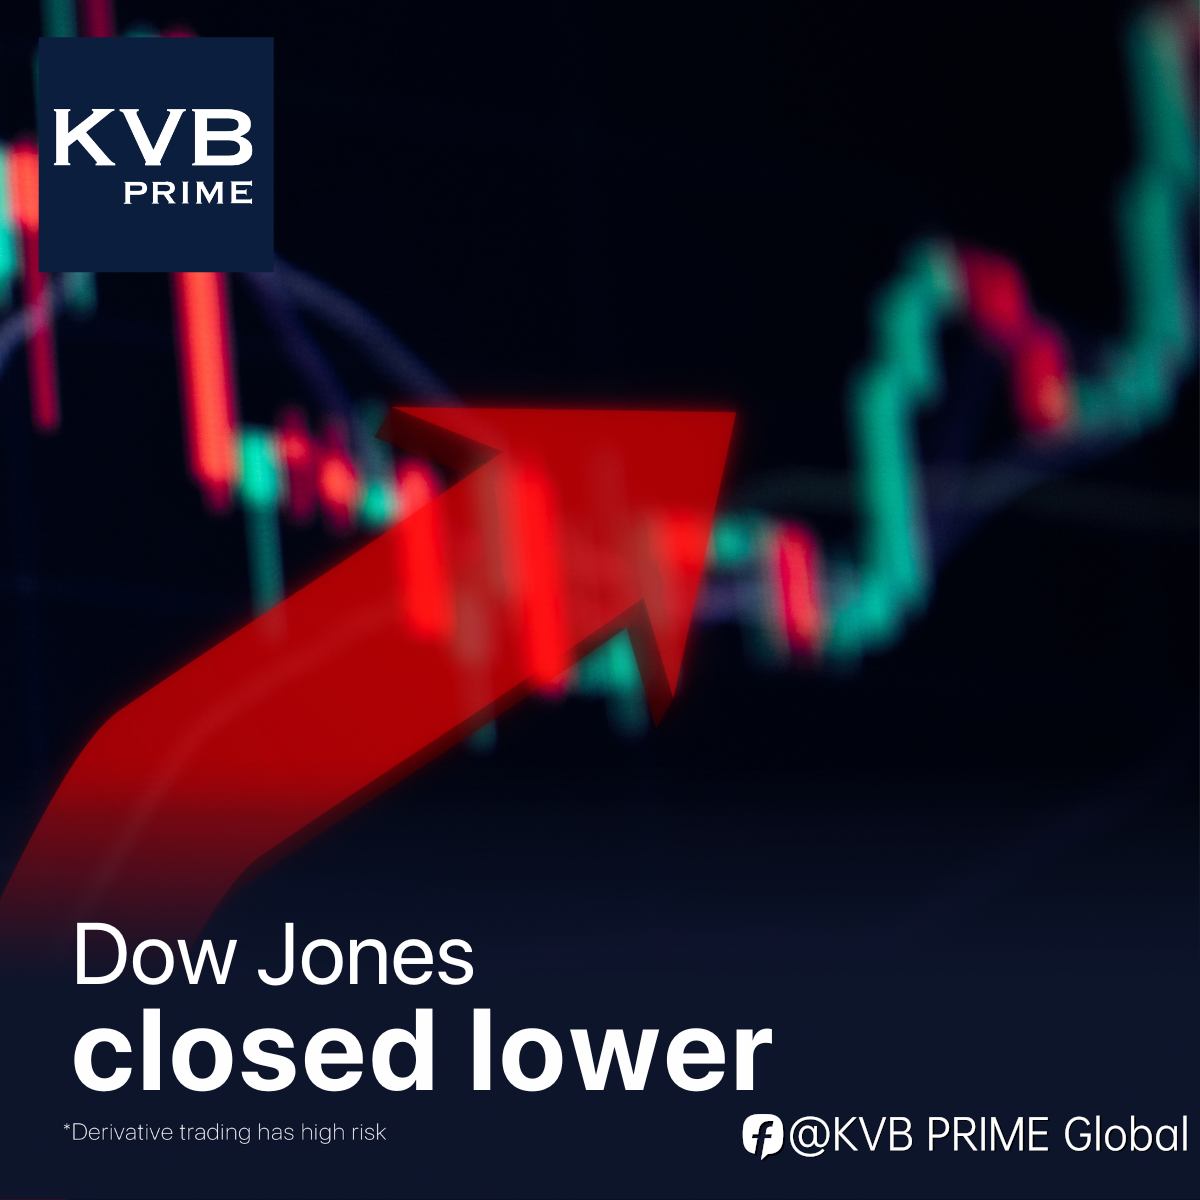 The Dow Jones Industrial Average closed lower, with yields rising in response to strong job market data.